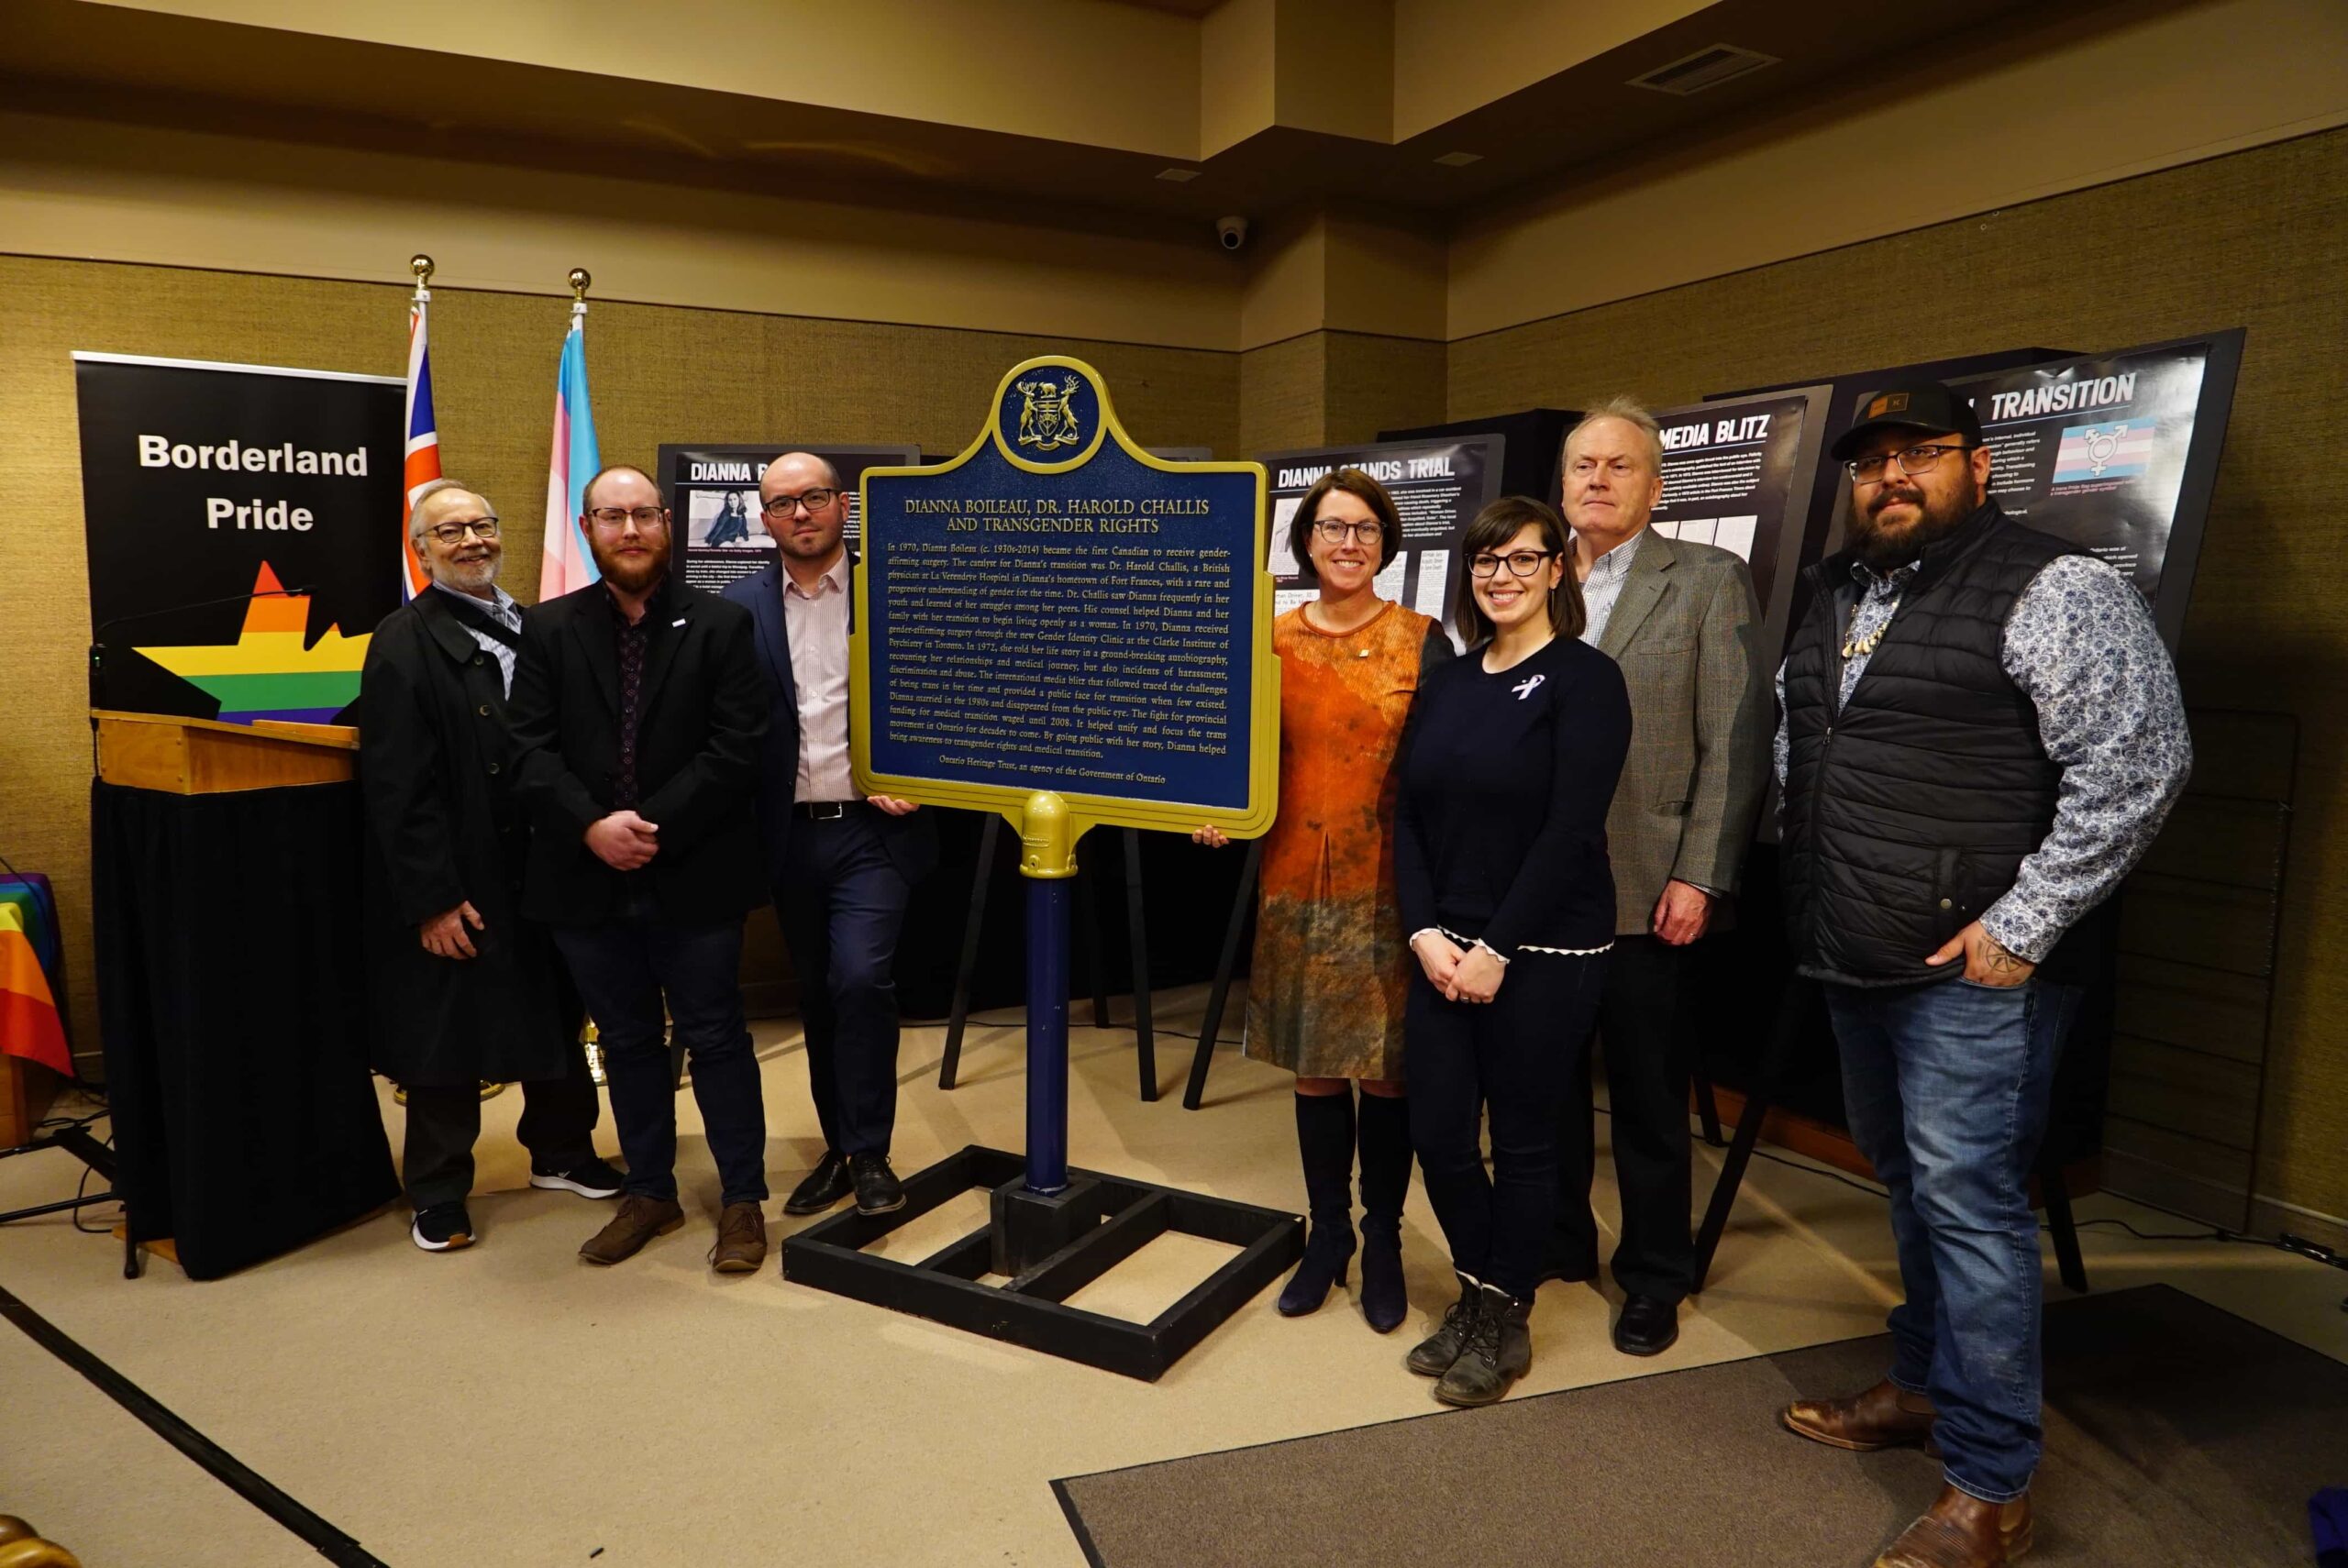 The Ontario Heritage Trust and Borderland Pride unveil a new provincial plaque commemorating Dianna Boileau and Dr. Harold Challis and trans rights on March 31, 2023 (International Transgender Day of Visibility) in Fort Frances, Ontario.